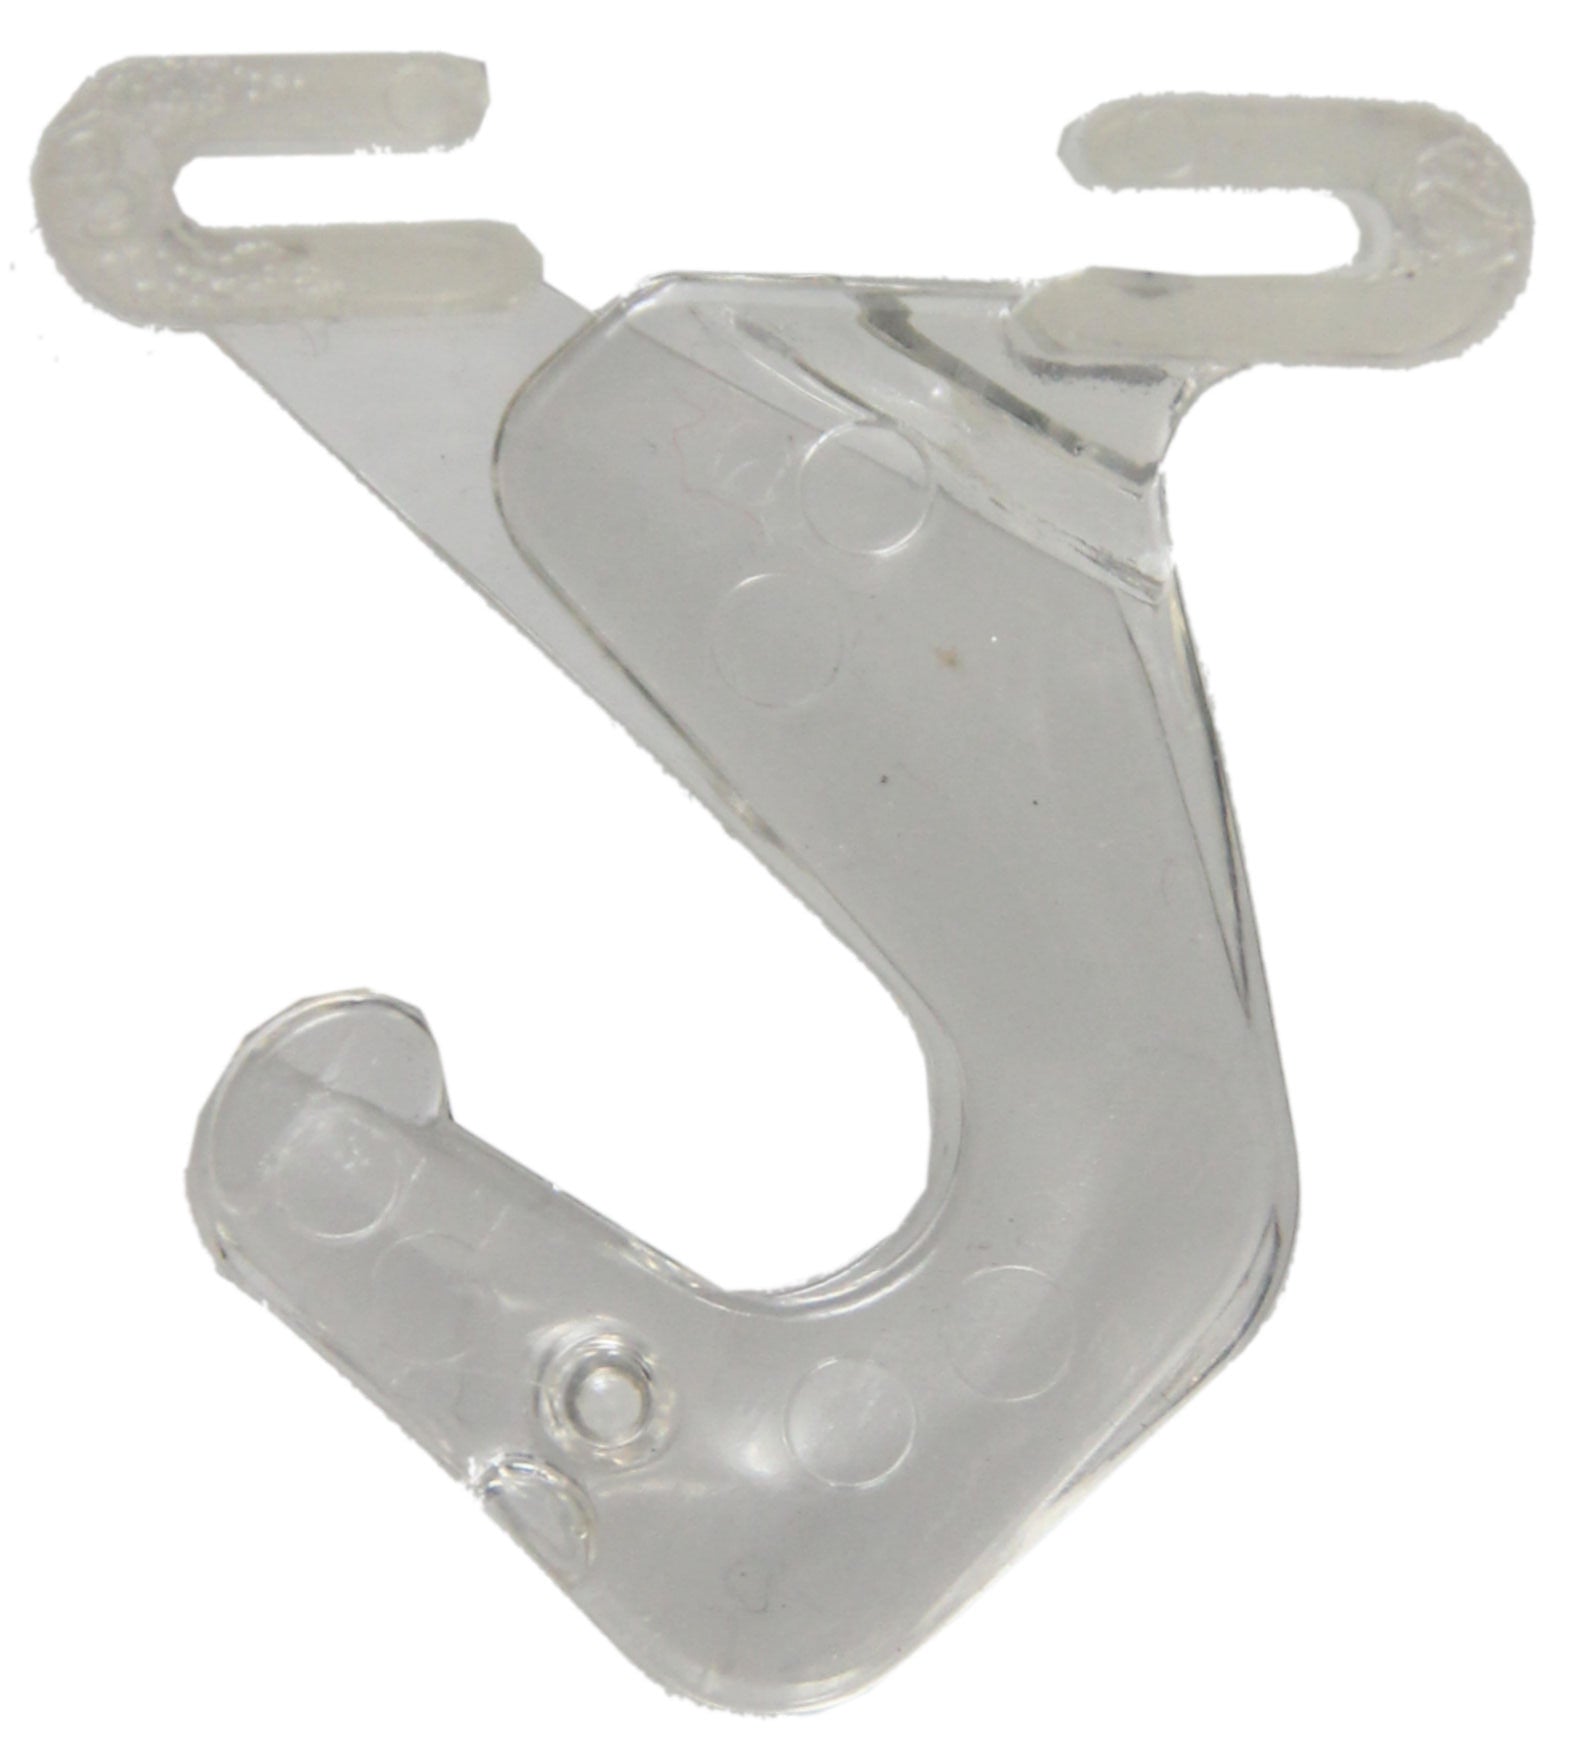 ALZO T-Bar Hooks for Suspended Drop Ceiling Cord Management, Set